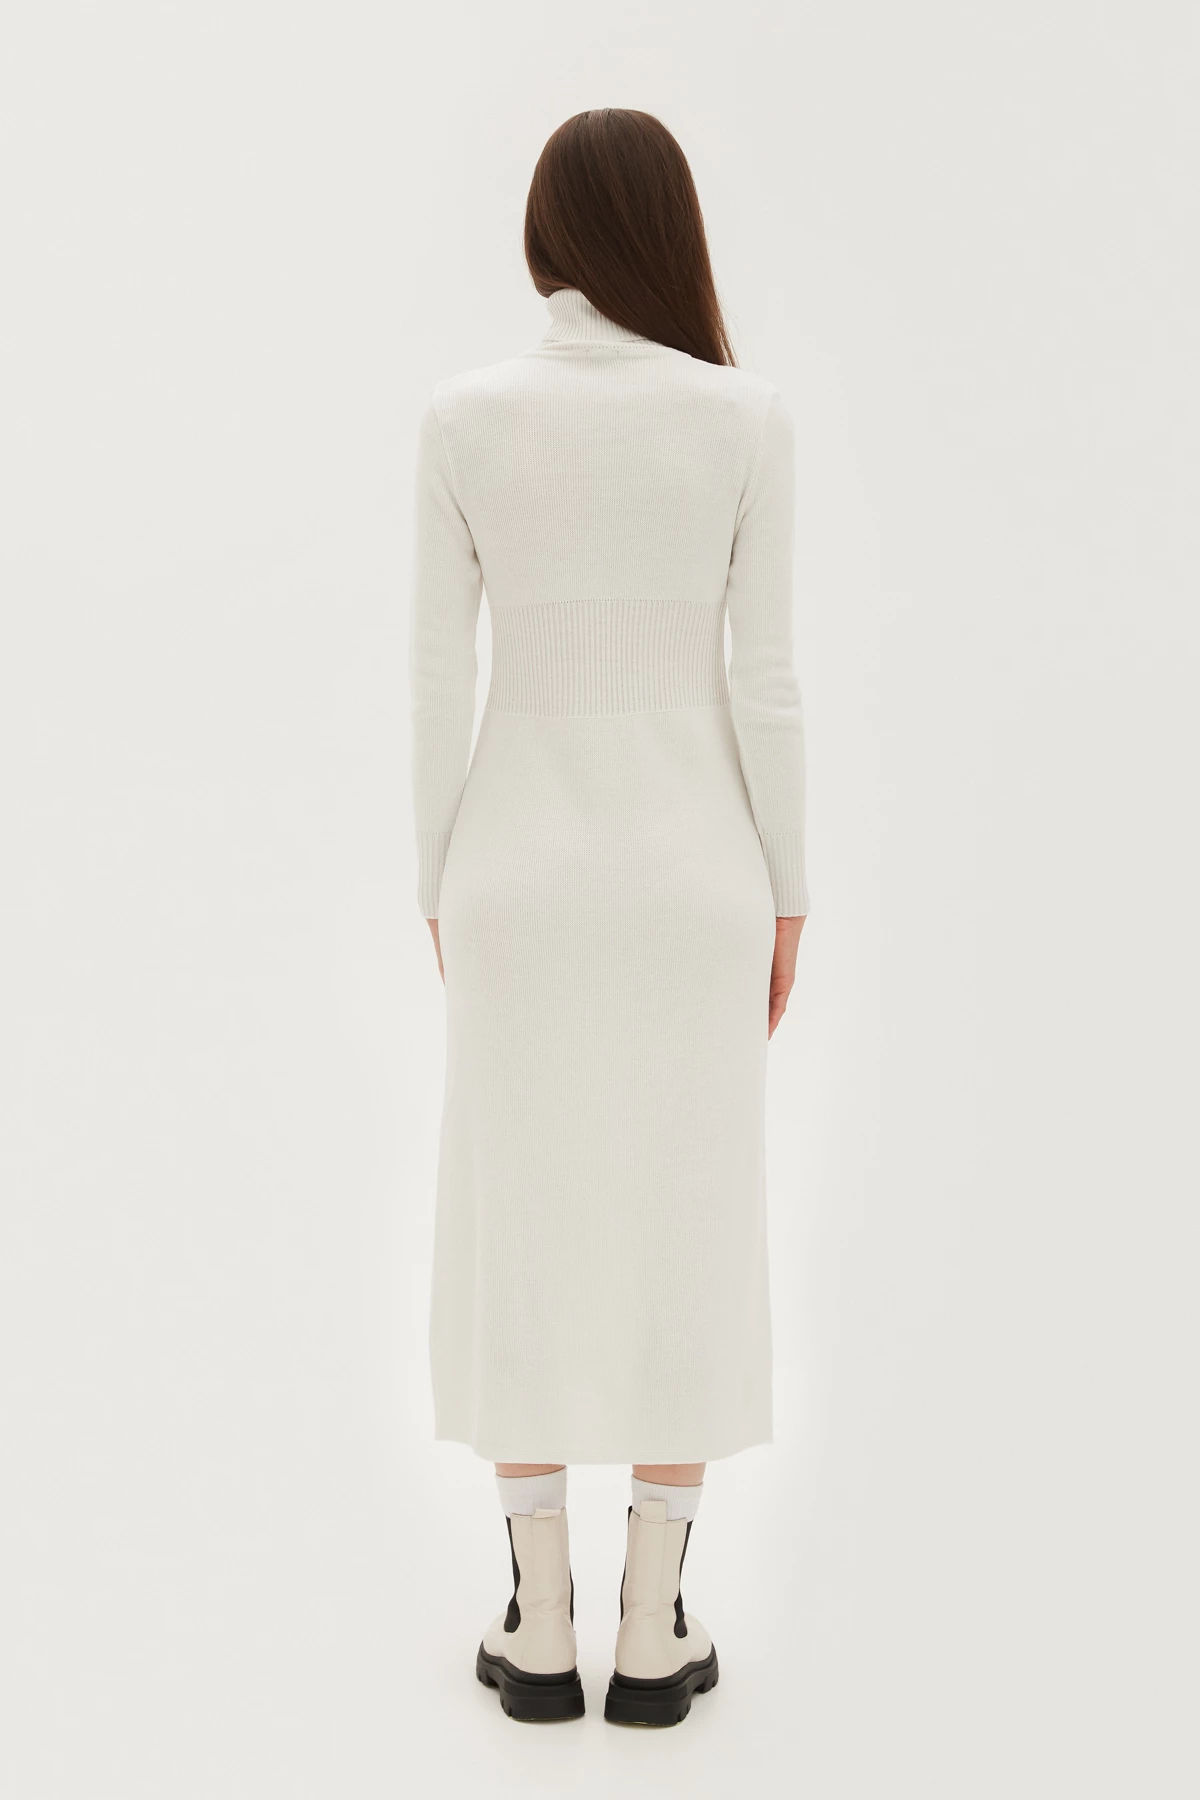 Milky knitted midi dress with wool, photo 5